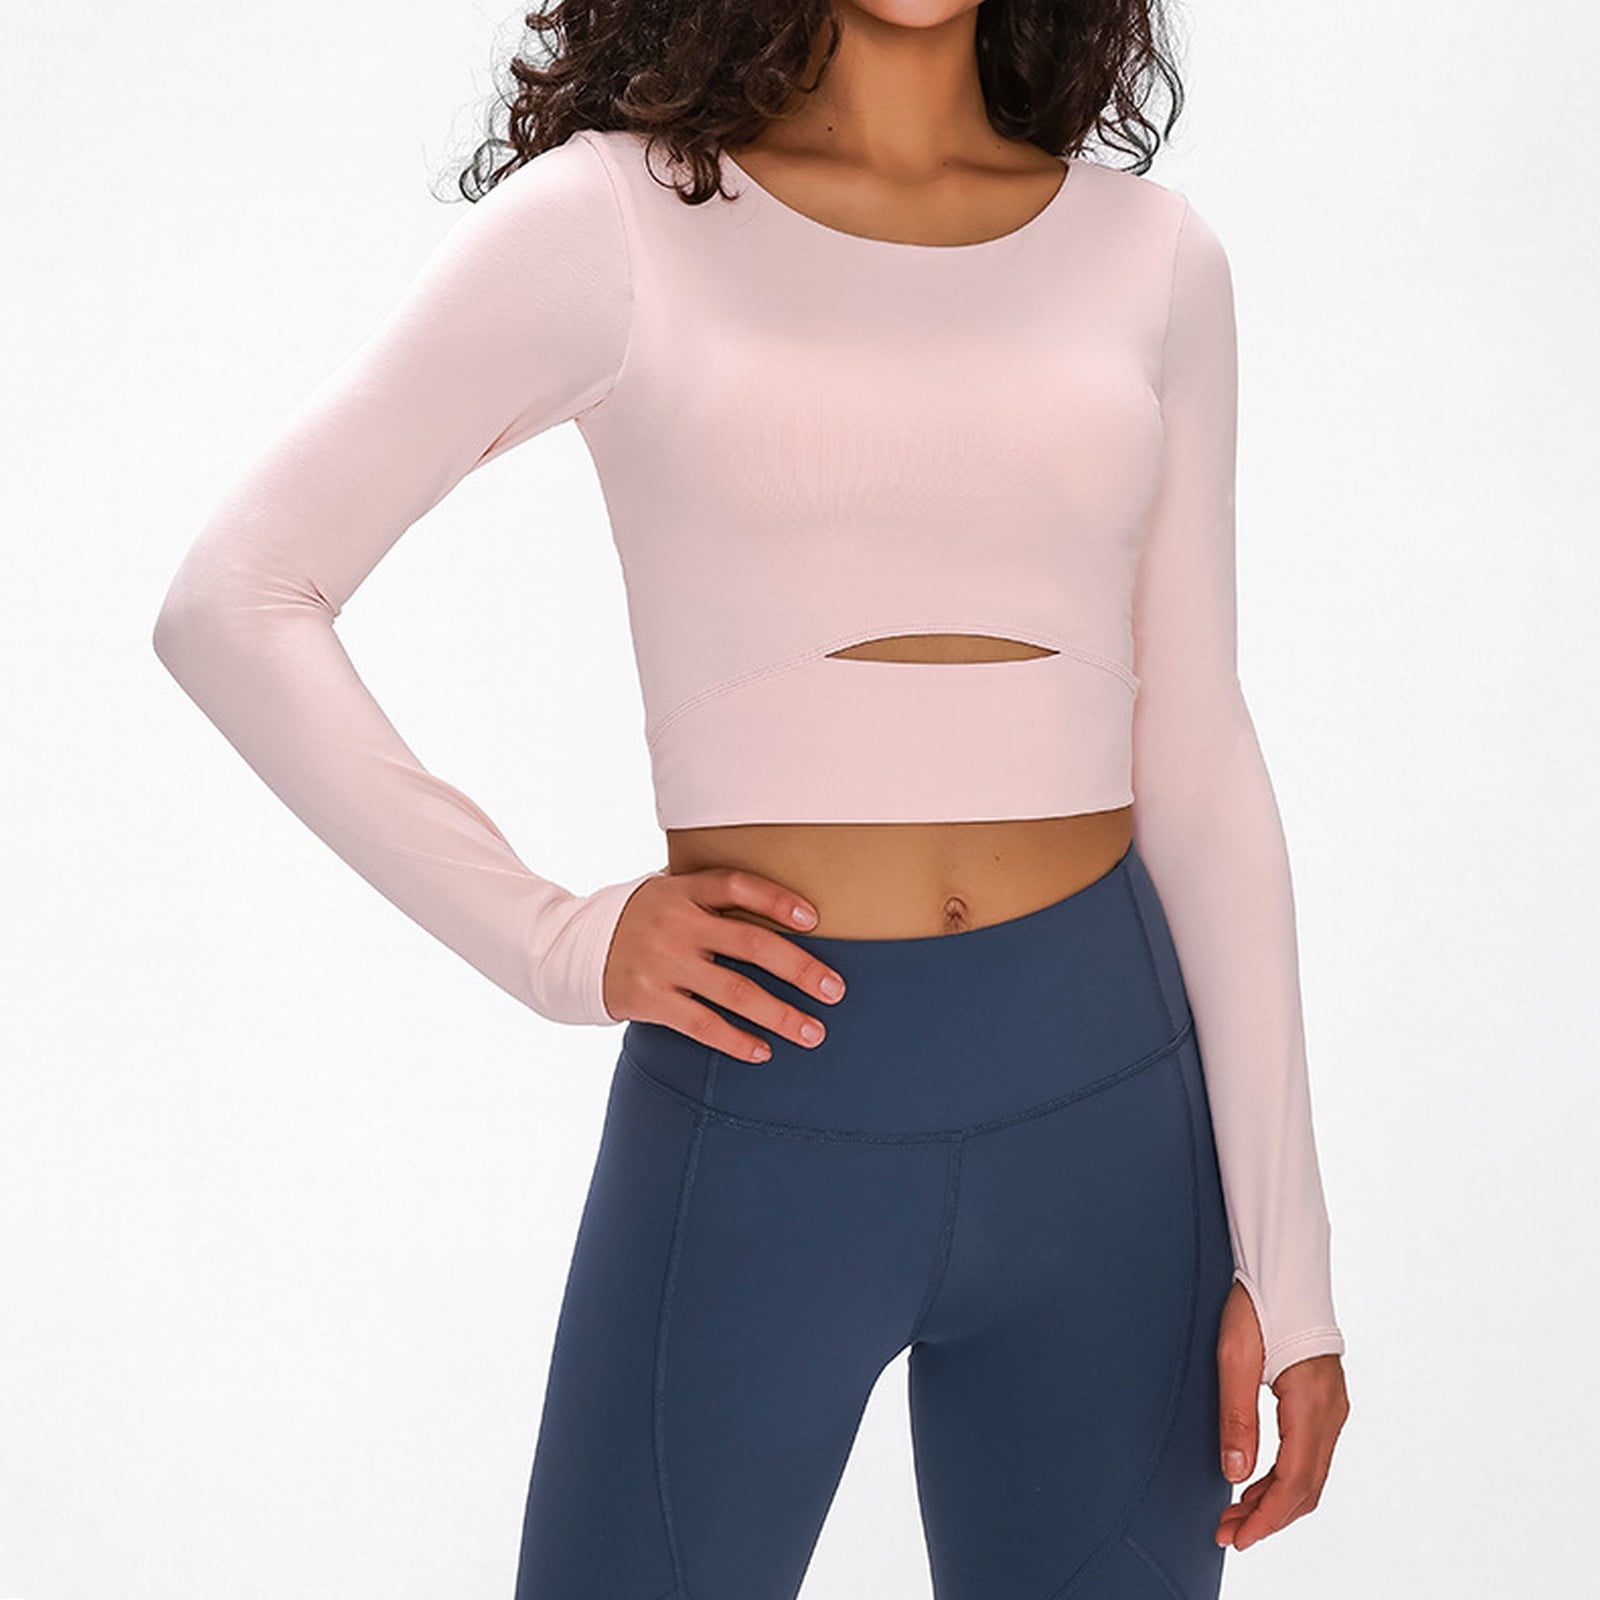 Booker Sports Bra Long Sleeve T Shirt With Chest Pad Half Short